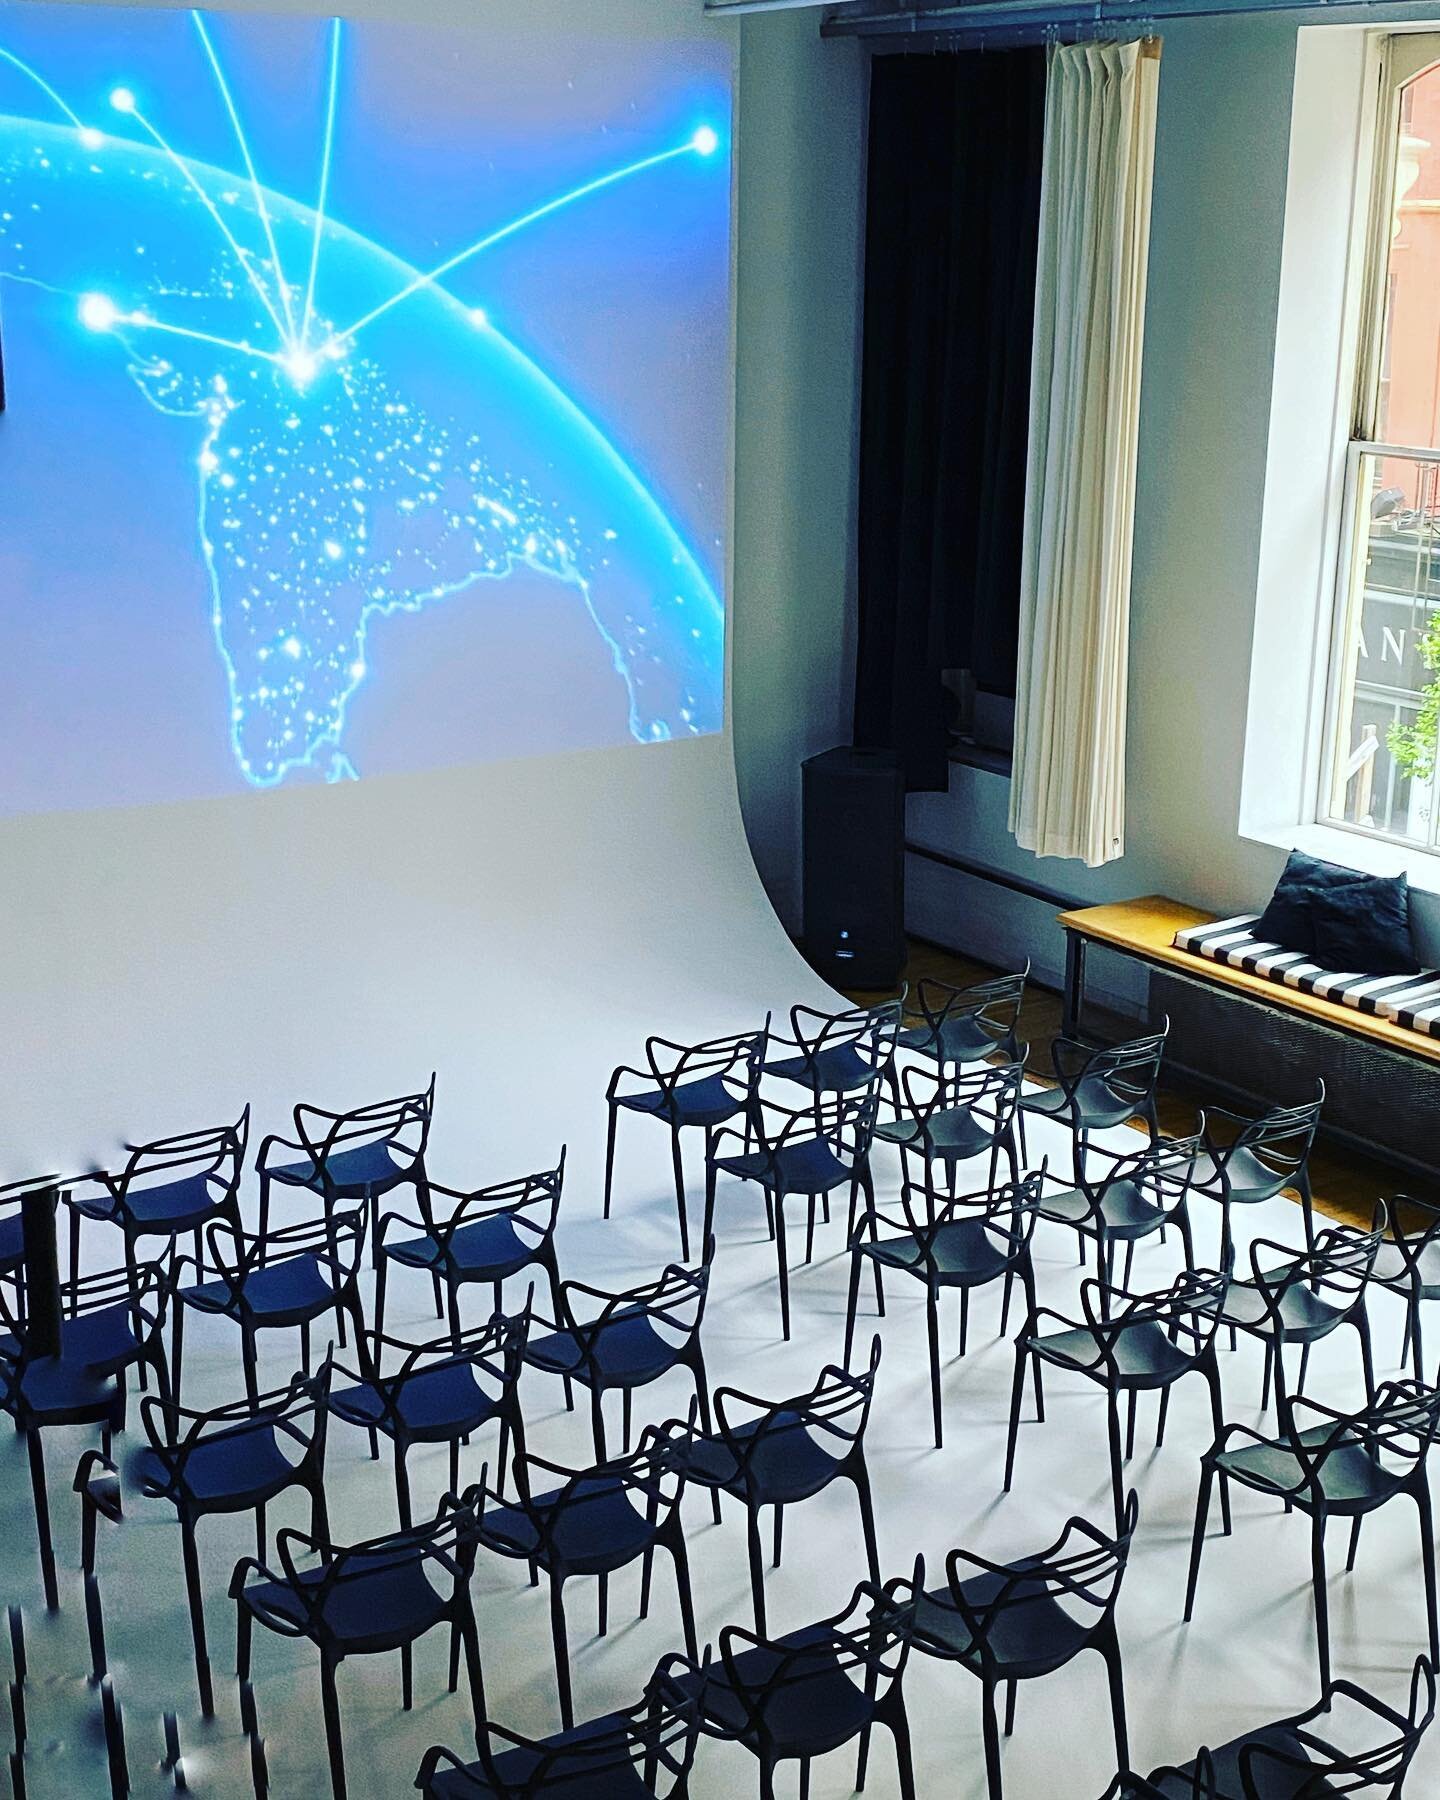 .
Yes! Watch your presentation with daylight. Mackie soundstage speakers complete the visuals with big, bold sound. Bose rear speakers add crisp treble to voices. Seating by Philippe Starck Masters chairs. 
Corporate Meeting Space with Style. 
.
.
.
